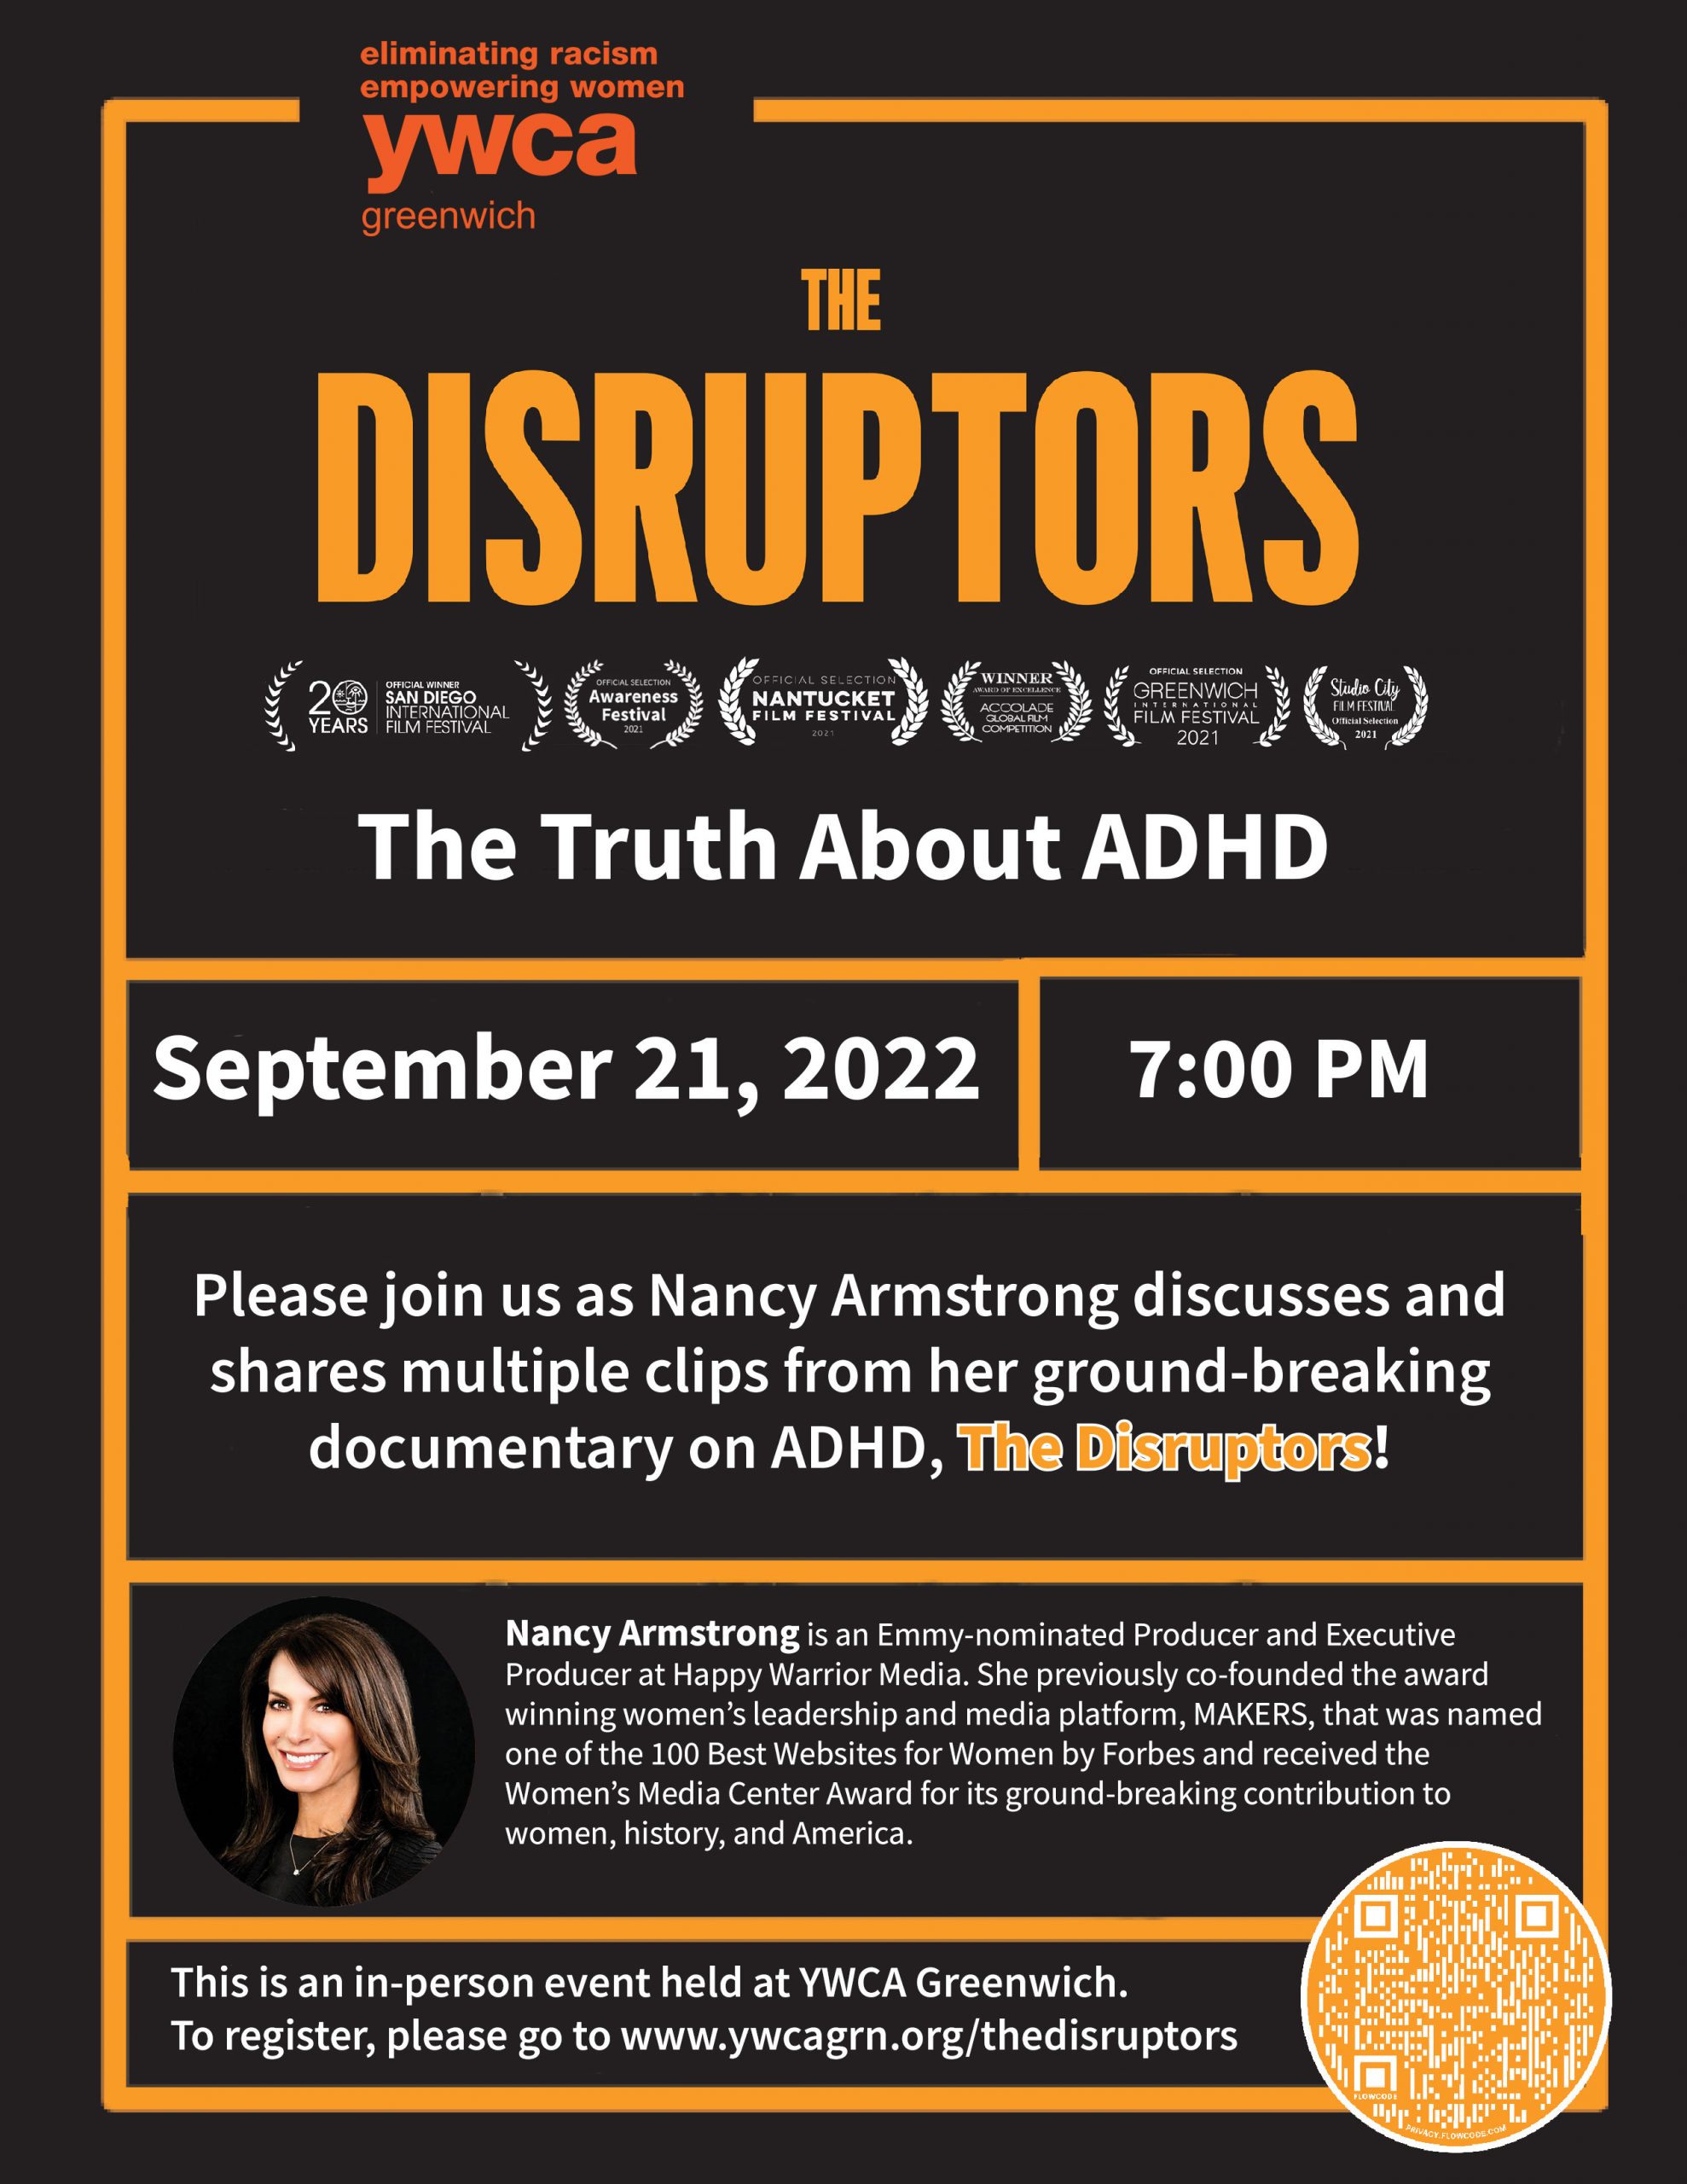 The Disruptors: The Truth about ADHD